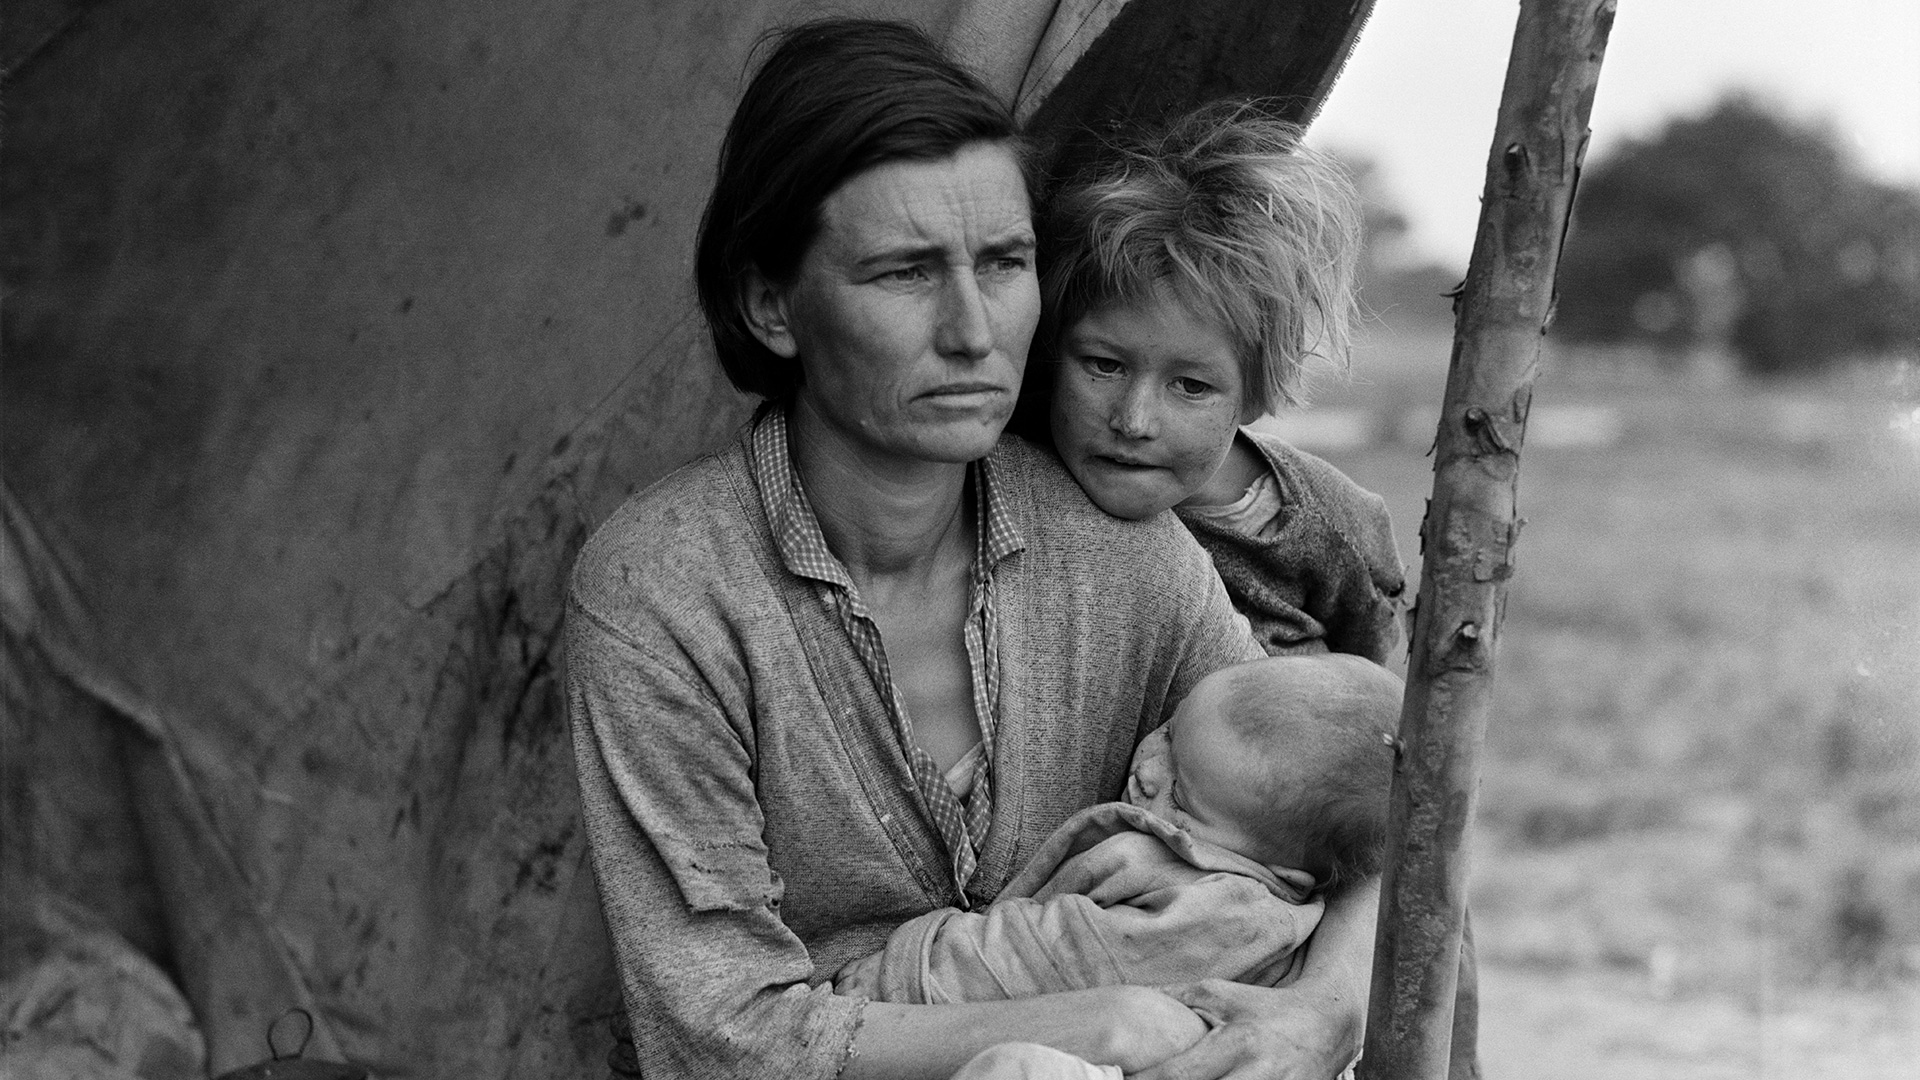 A migrant woman and her children during the depression